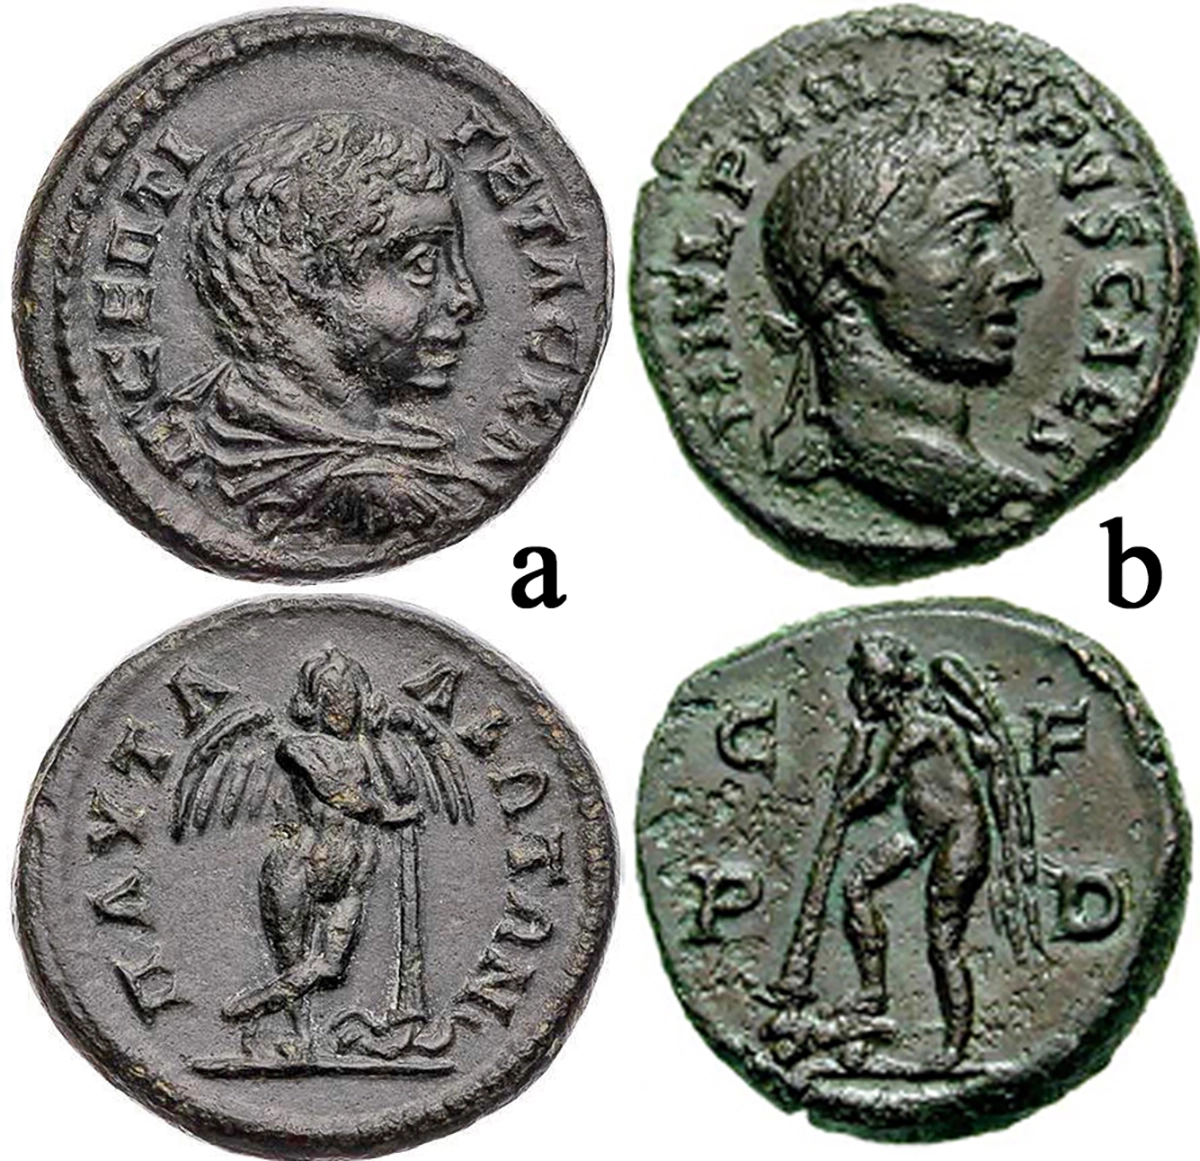 Figure 6: Thanatos. a) Thrace Pautalia, Geta as Caesar, 198-209 CE, AE-Assarion (4.50 g.) Obv:Geta armored and draped bust r. / Thanatos stands facing and leans on a torch, the burning end of which rests on the base, Varbanov I 5465, b) Thrace, Deultum. Philip II. 244-249 CE. AE 18mm (3.67 gm). Laureate head right / Thanatos standing left, leaning on inverted torch, which he extinguishes, Lindgren II & III.